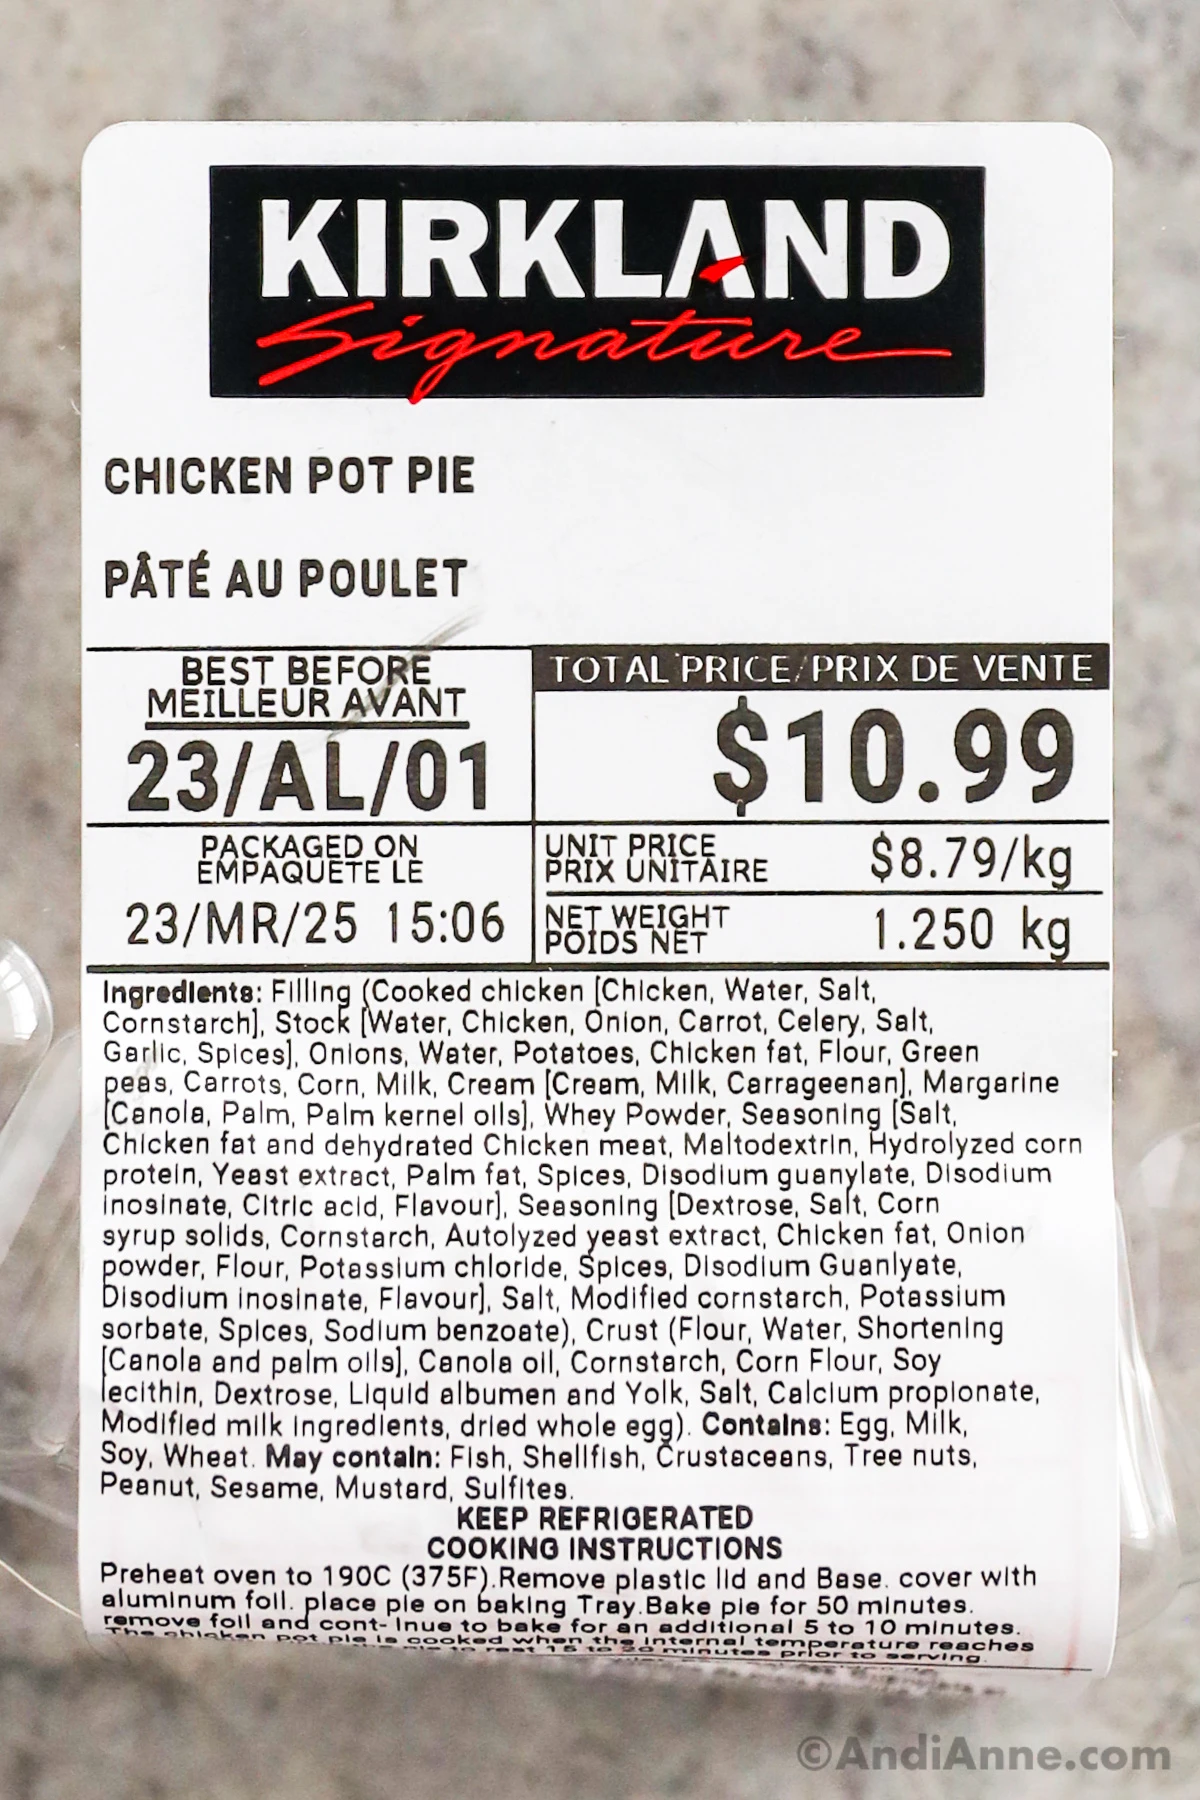 Close up of the chicken pot pie costco label with ingredients, price and best before date.